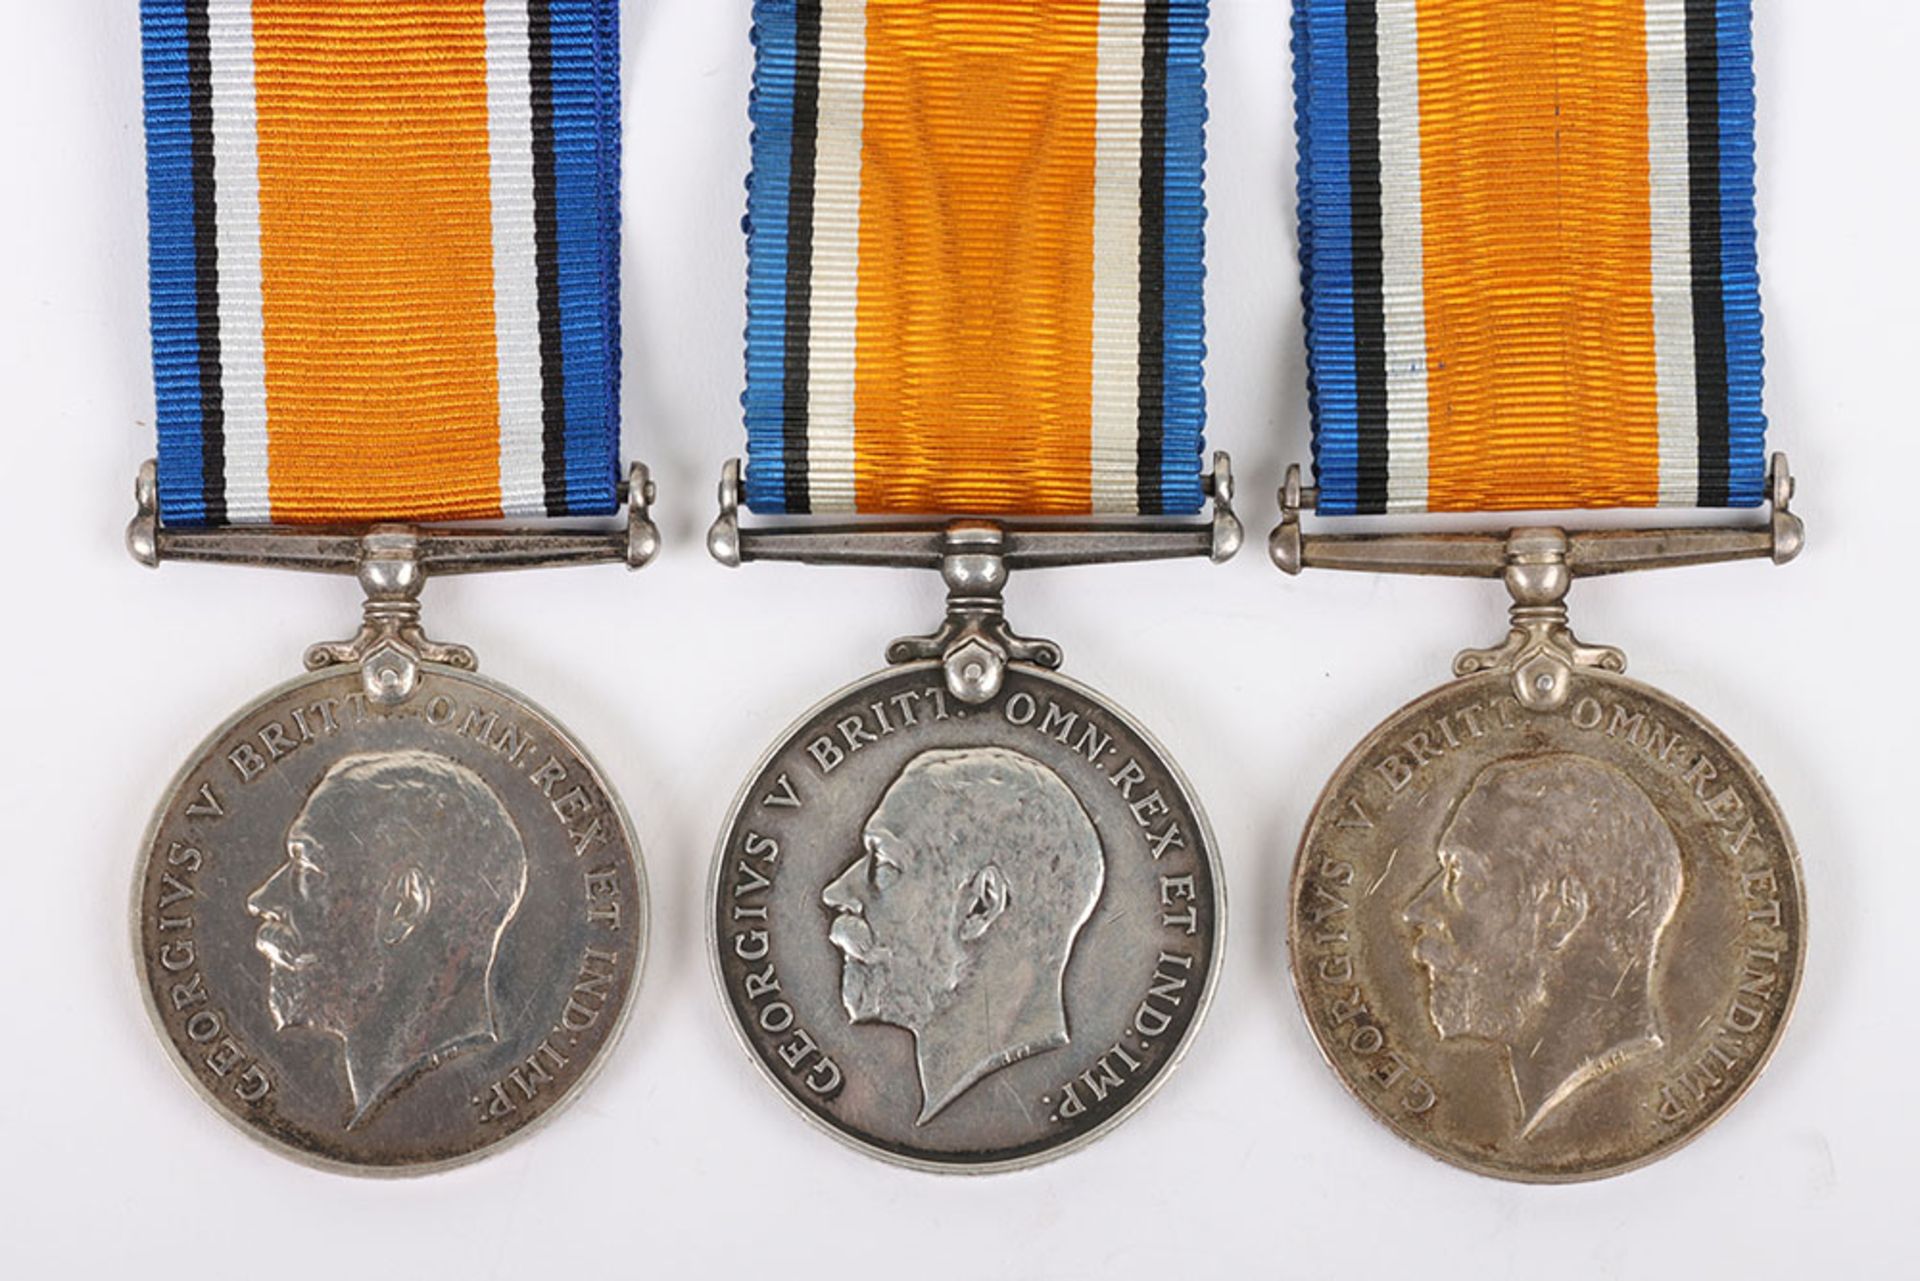 A collection of 3 WW1 British War medals